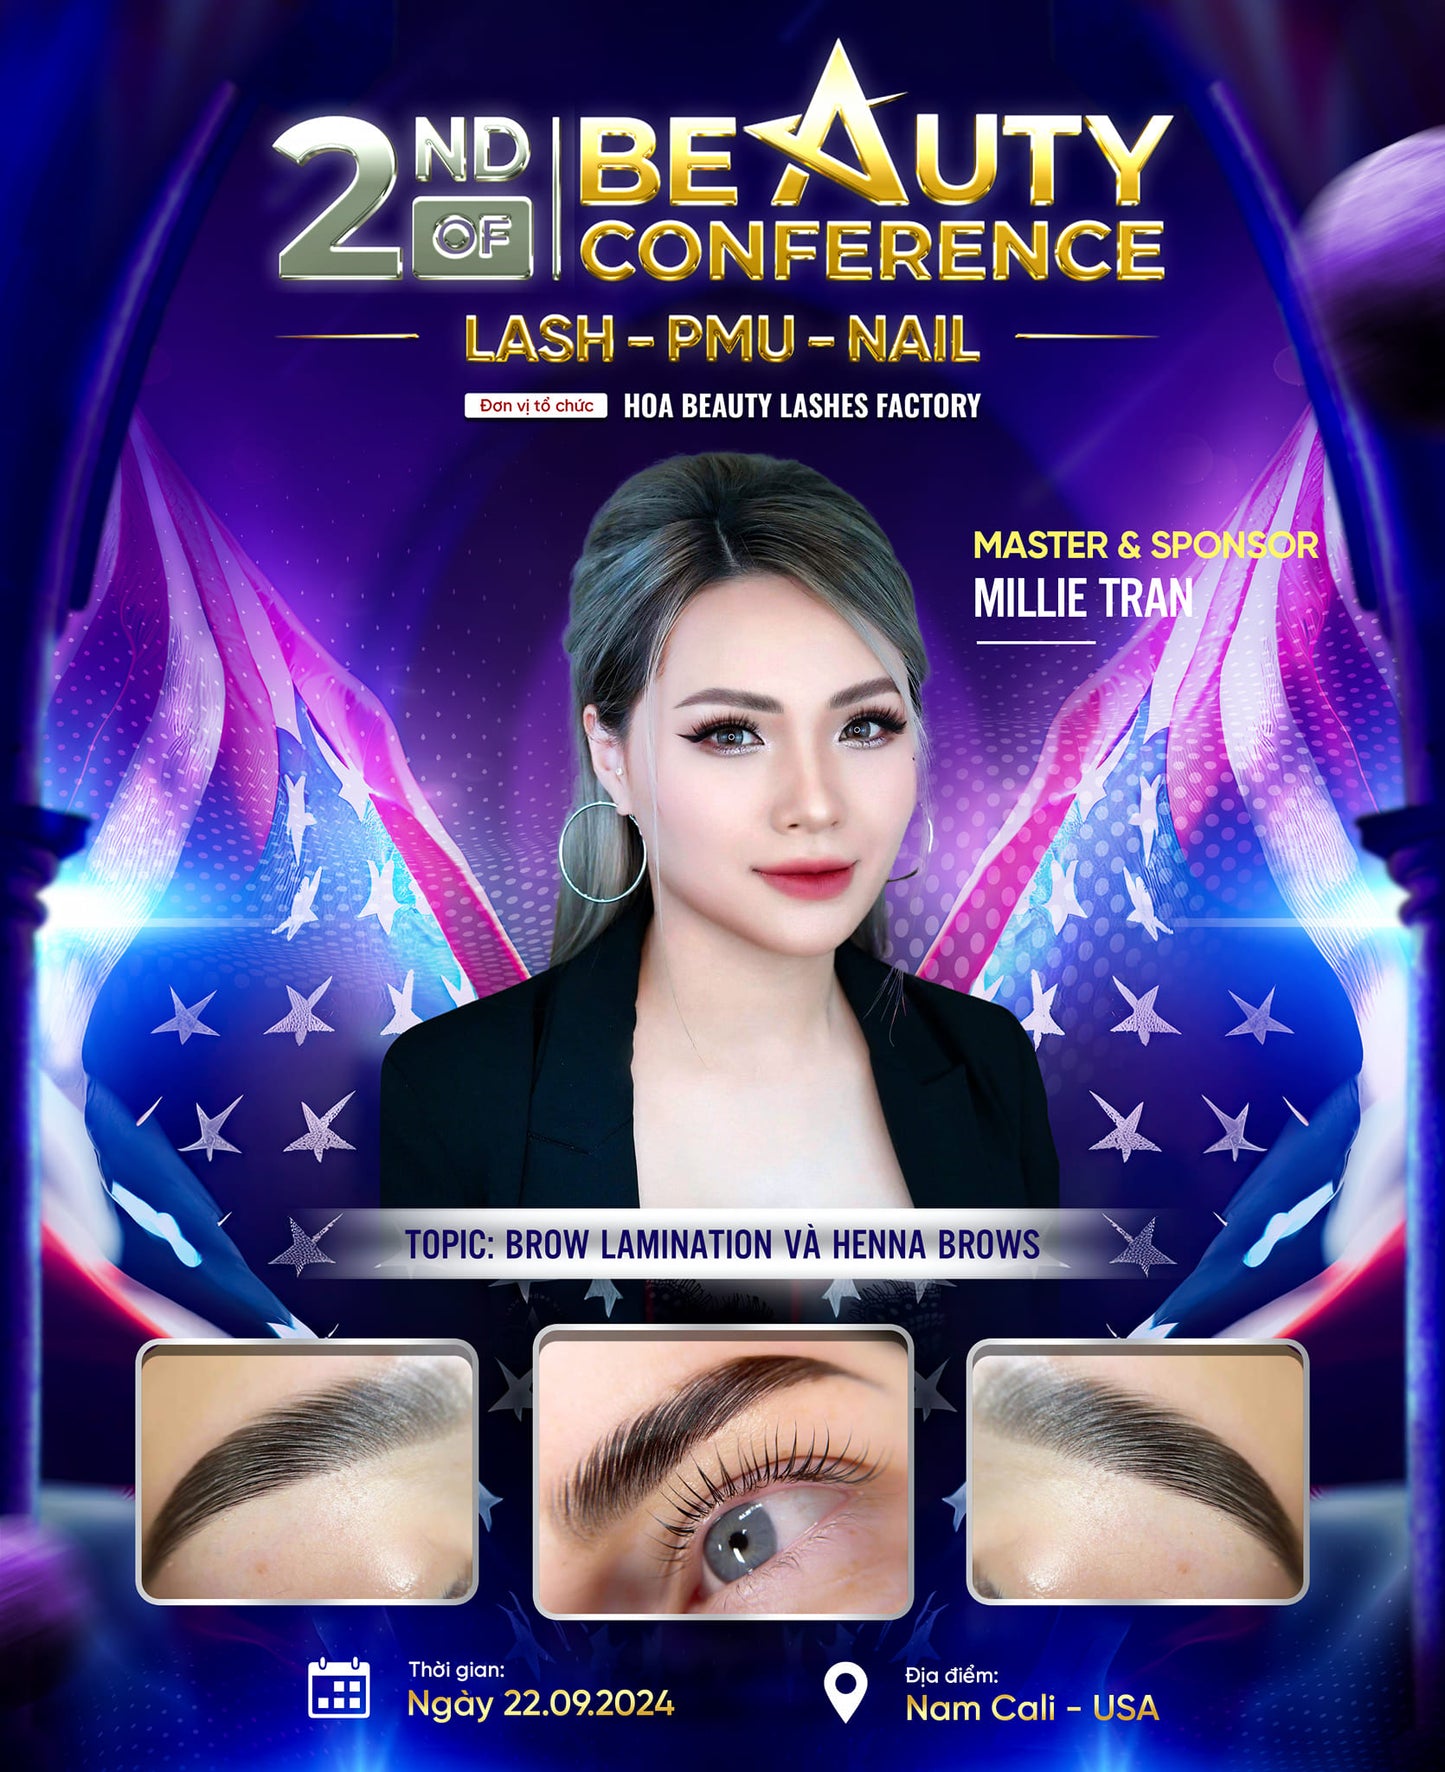 TICKET FOR CONFERENCE Nails - Lashes - P.M.U - Skincare in USA